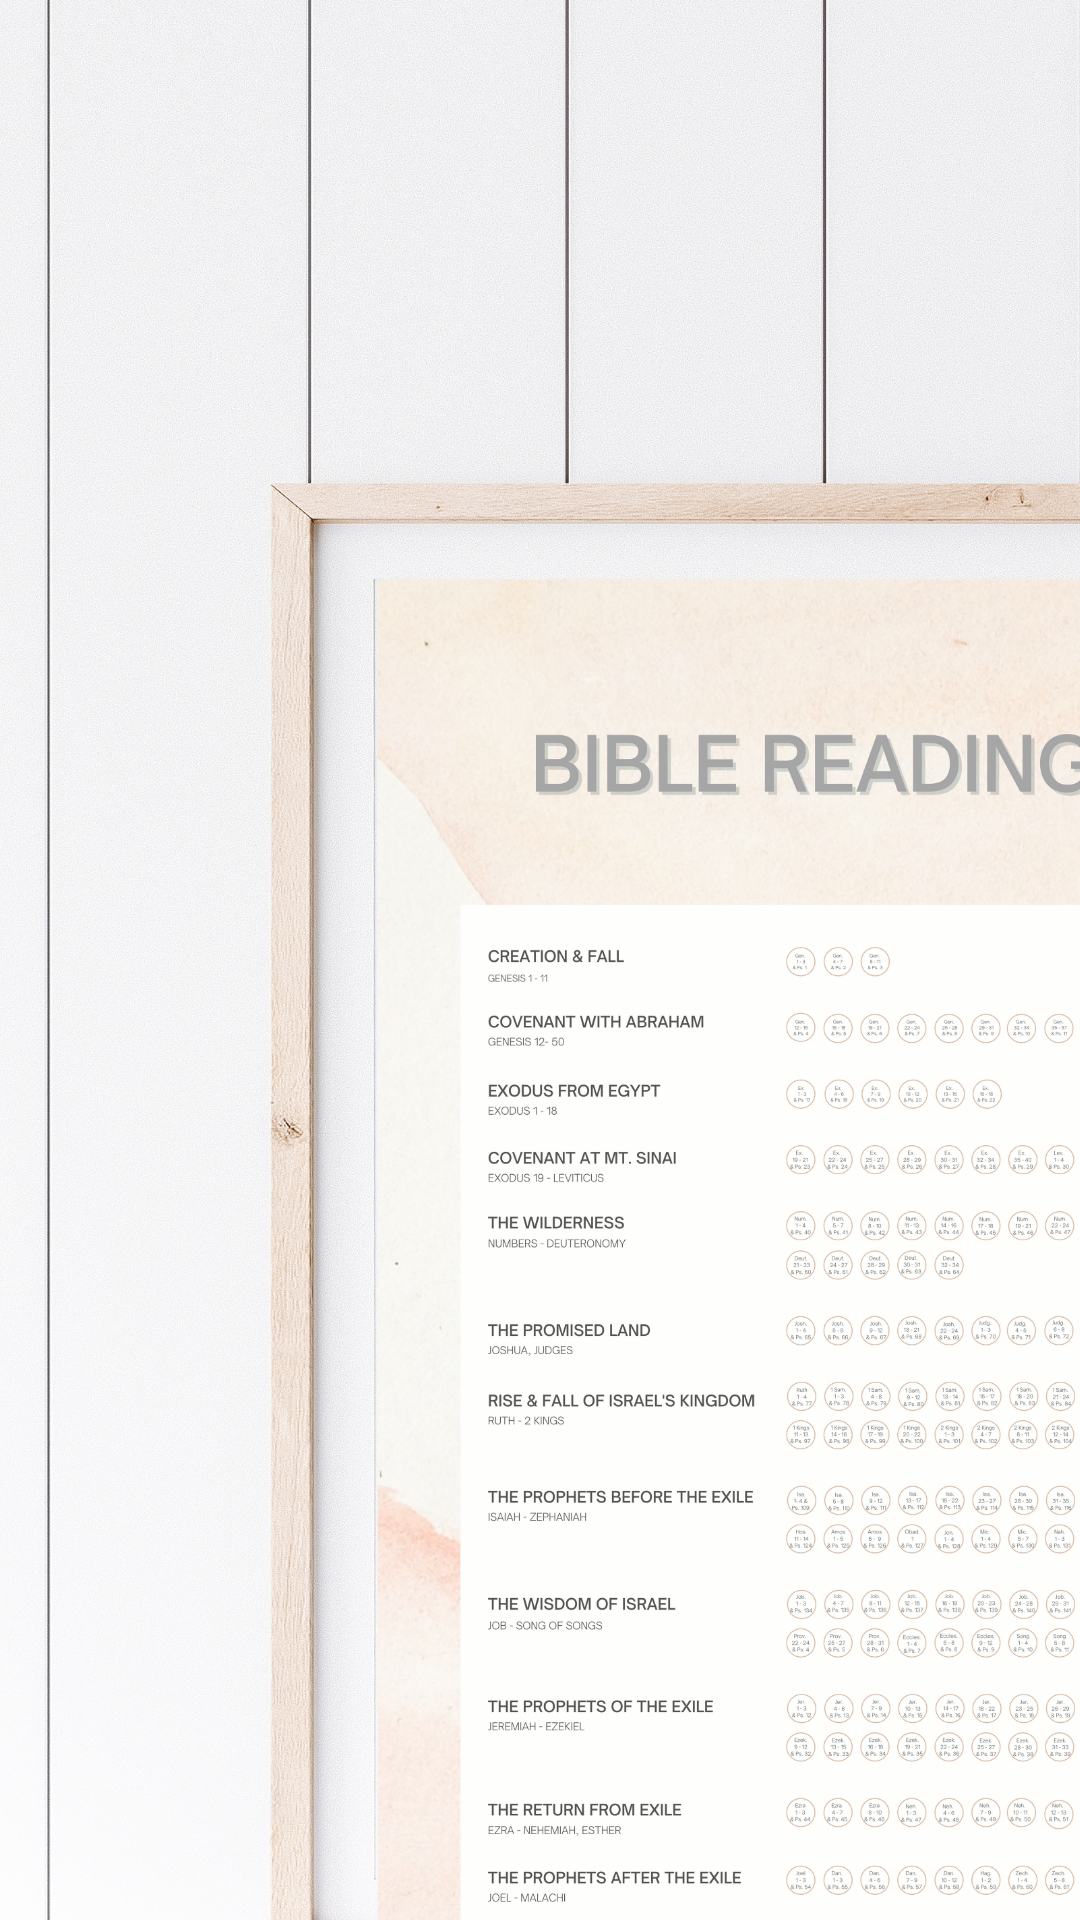 Bible Reading Wall Tracker - 18" x 24" - PHYSICAL COPY